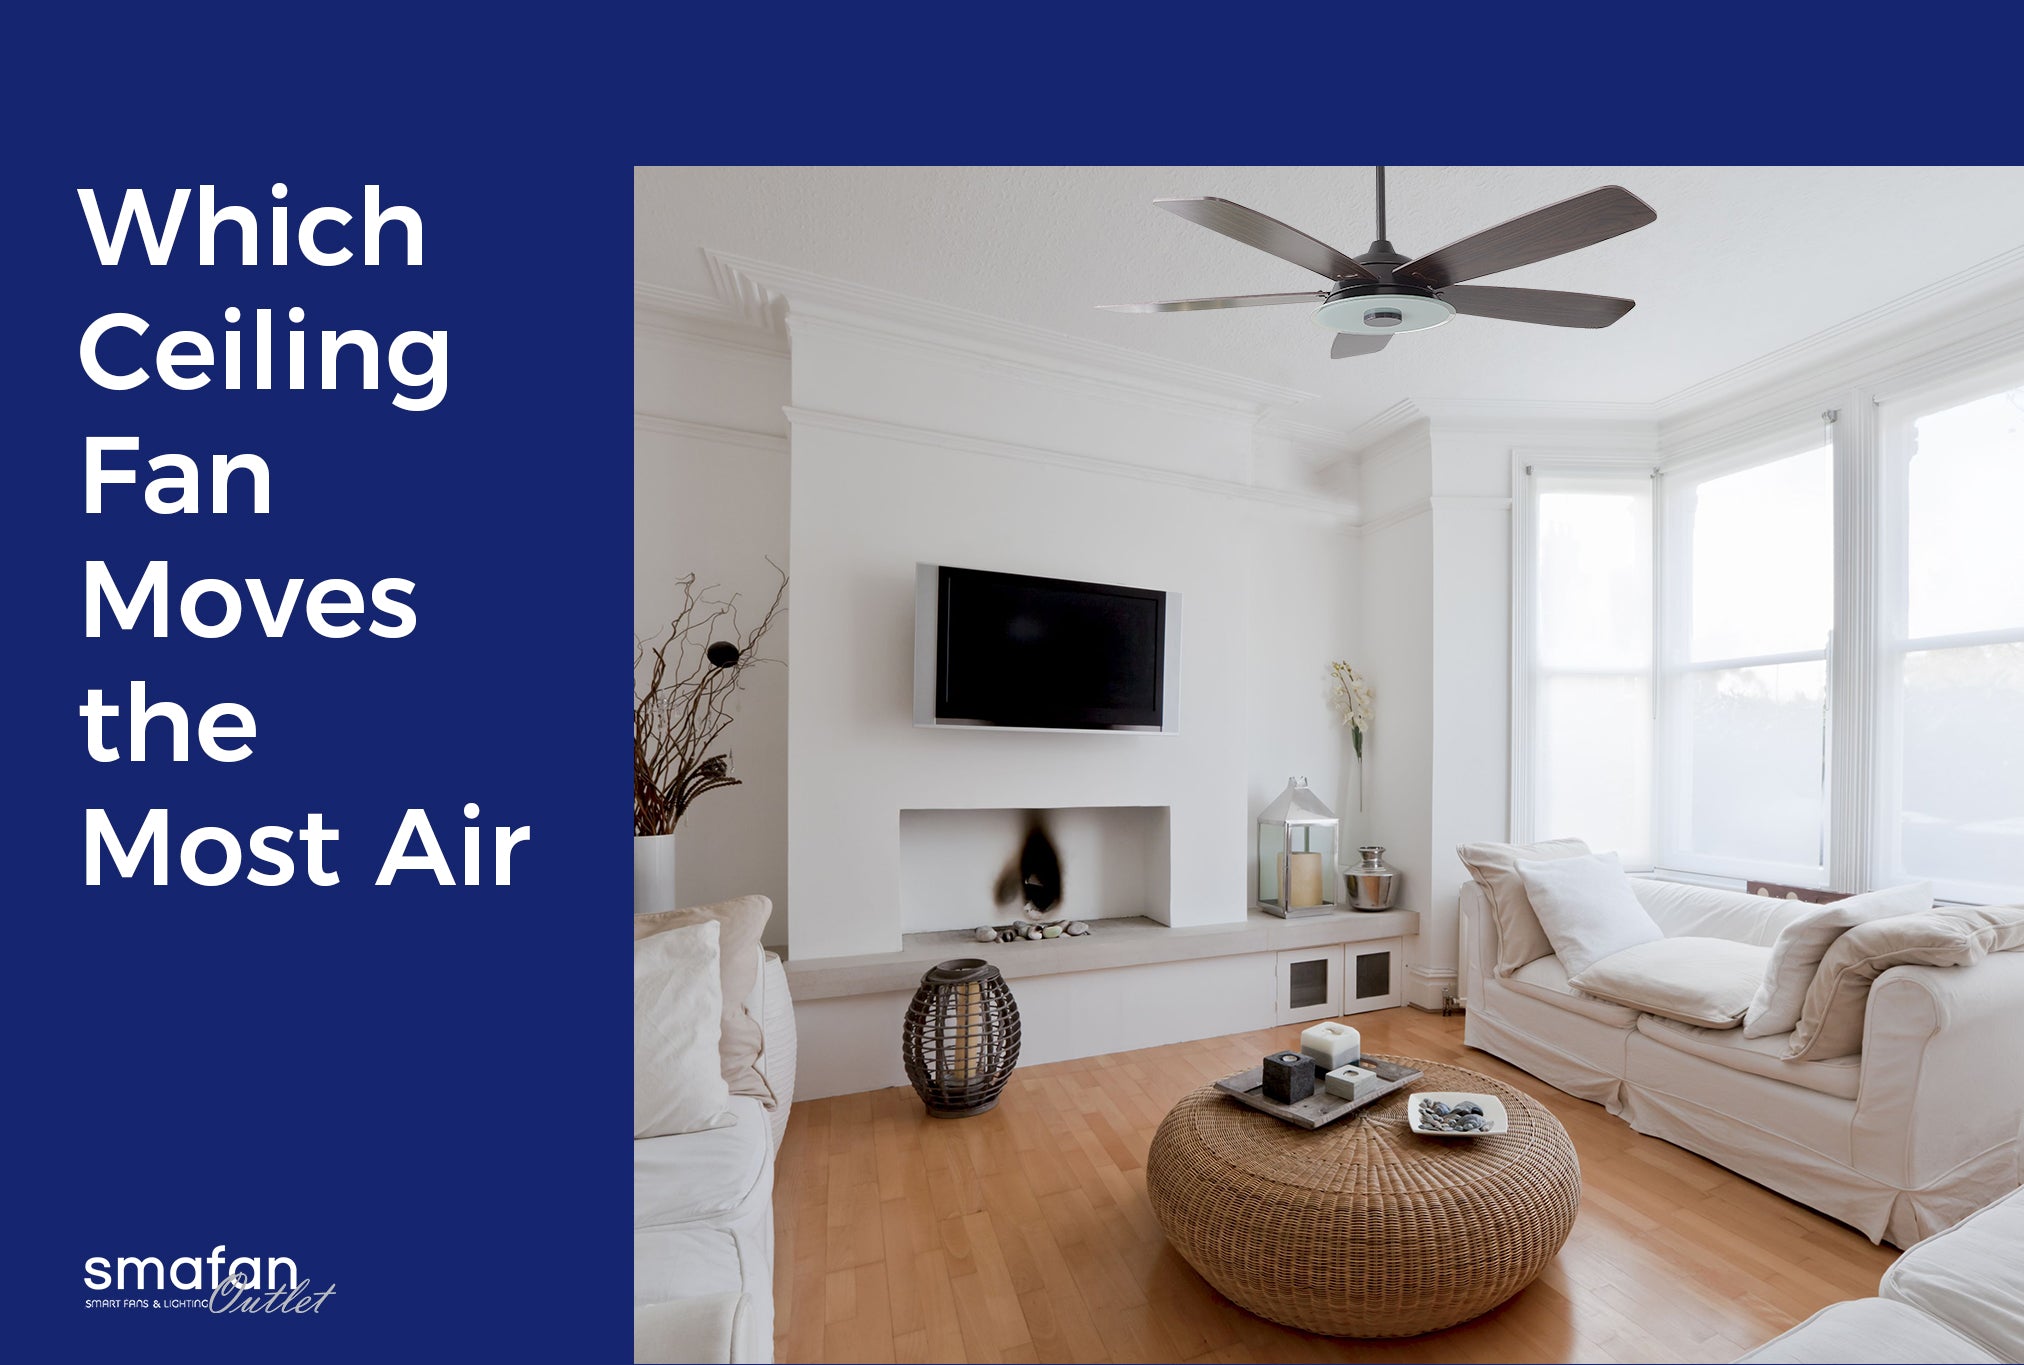 Which Ceiling Fan Moves the Most Air